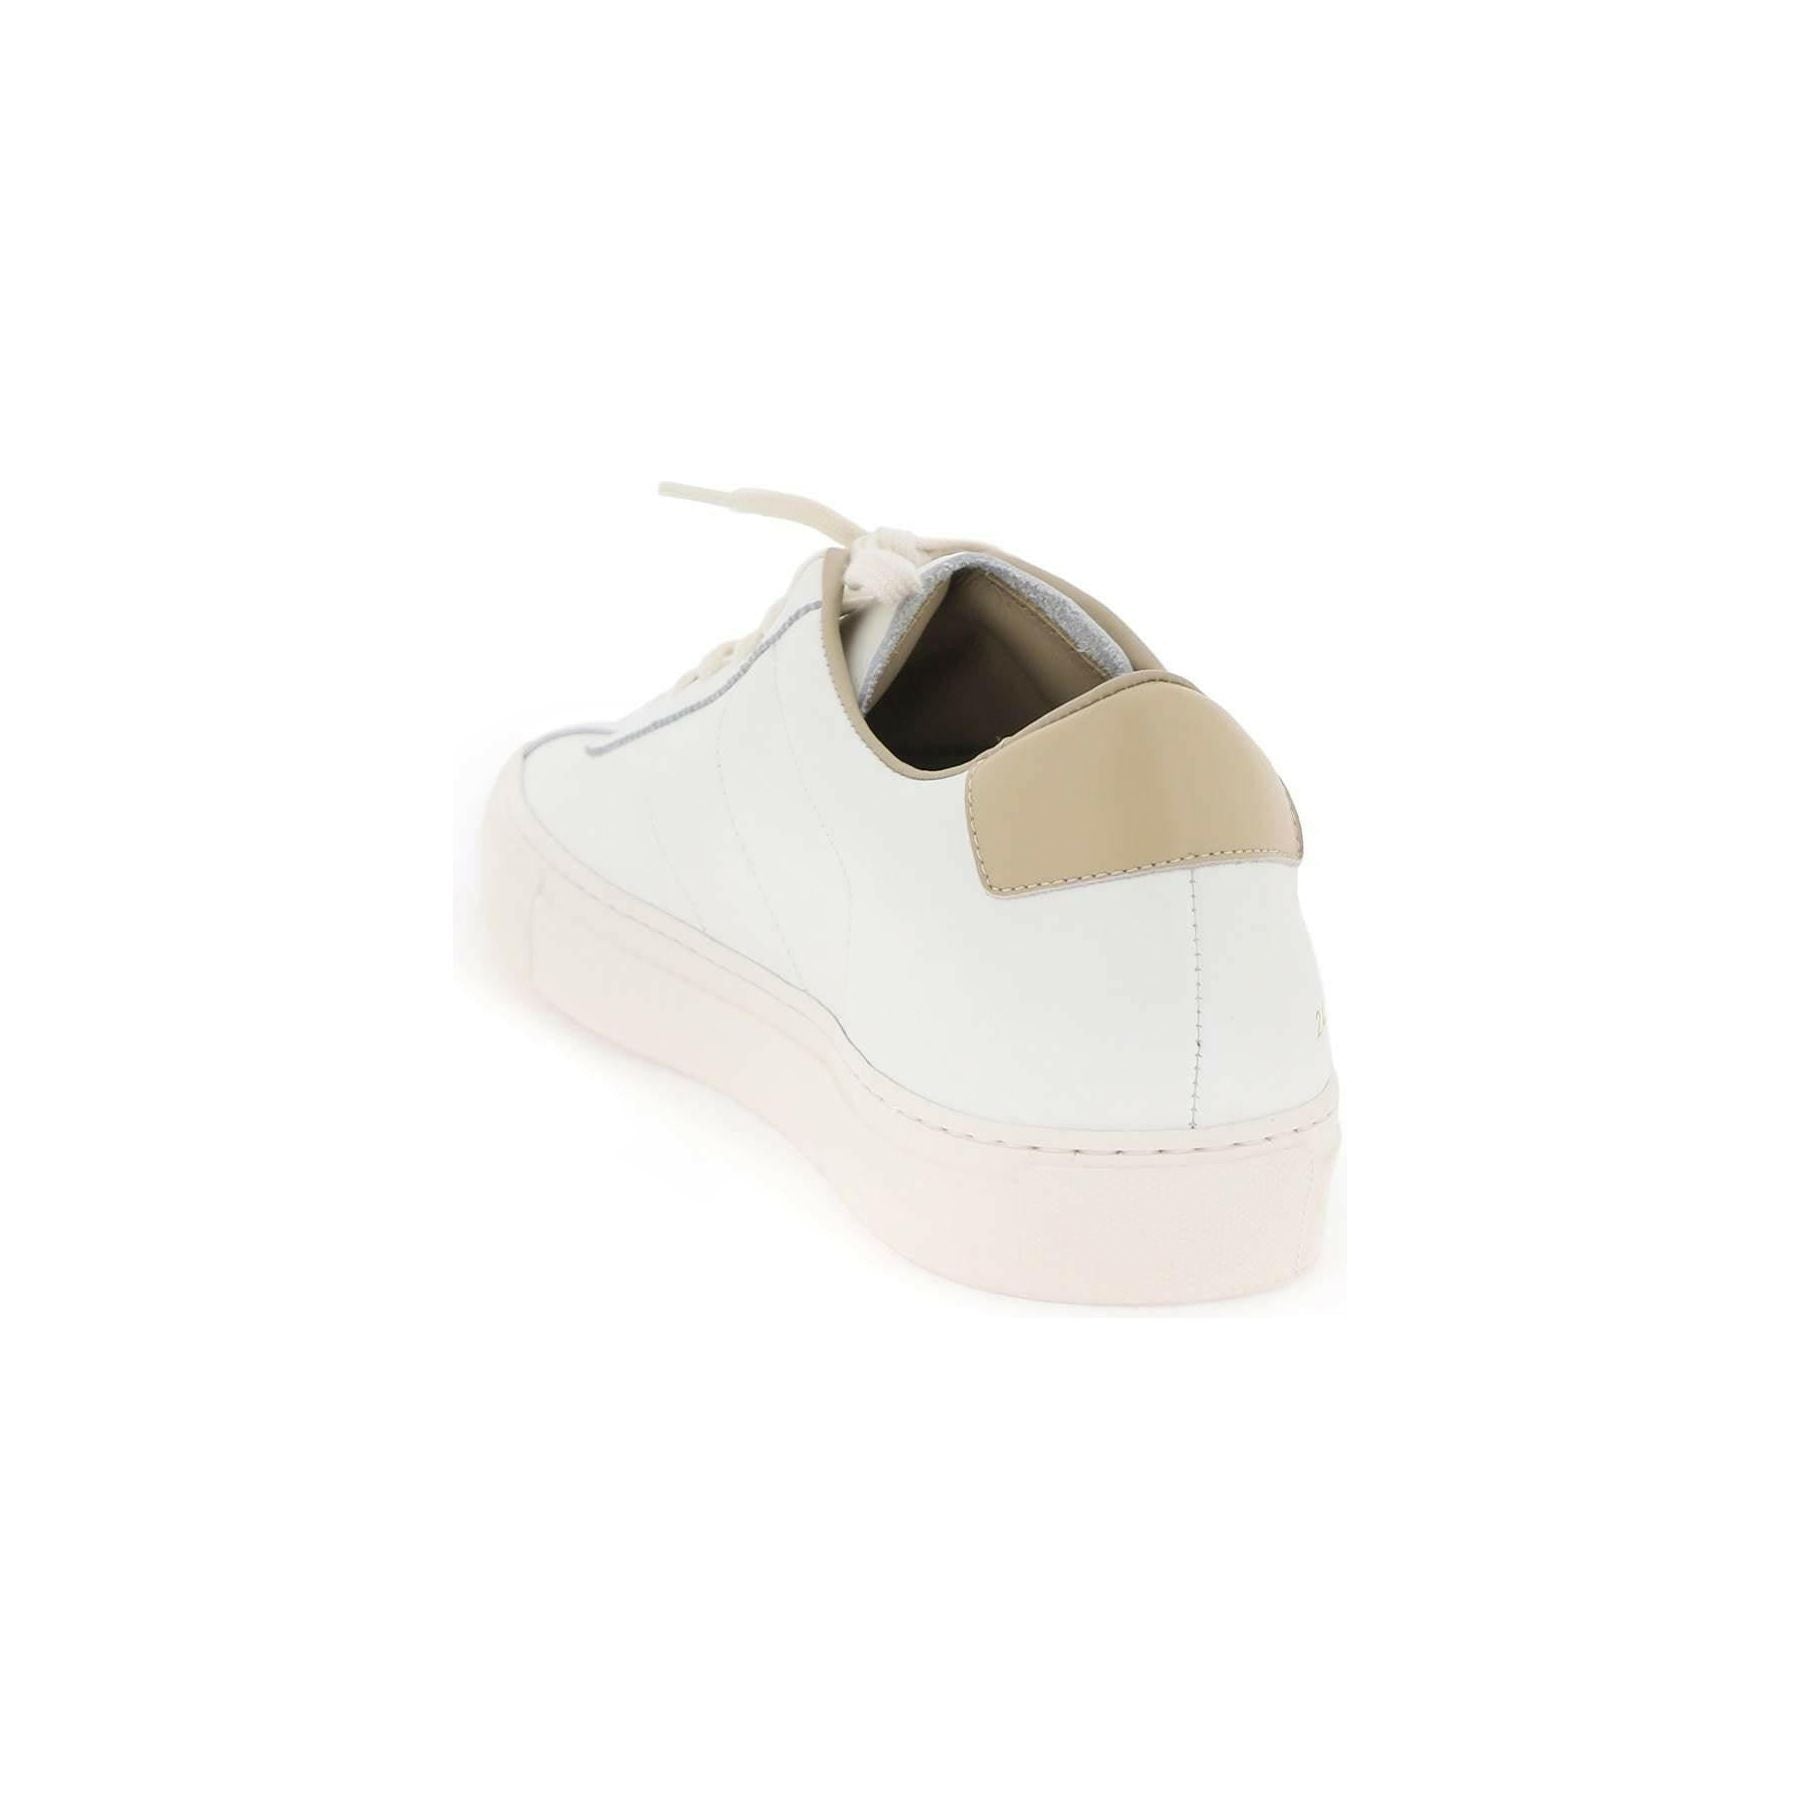 White 70's Tennis Smooth Leather Sneakers COMMON PROJECTS JOHN JULIA.